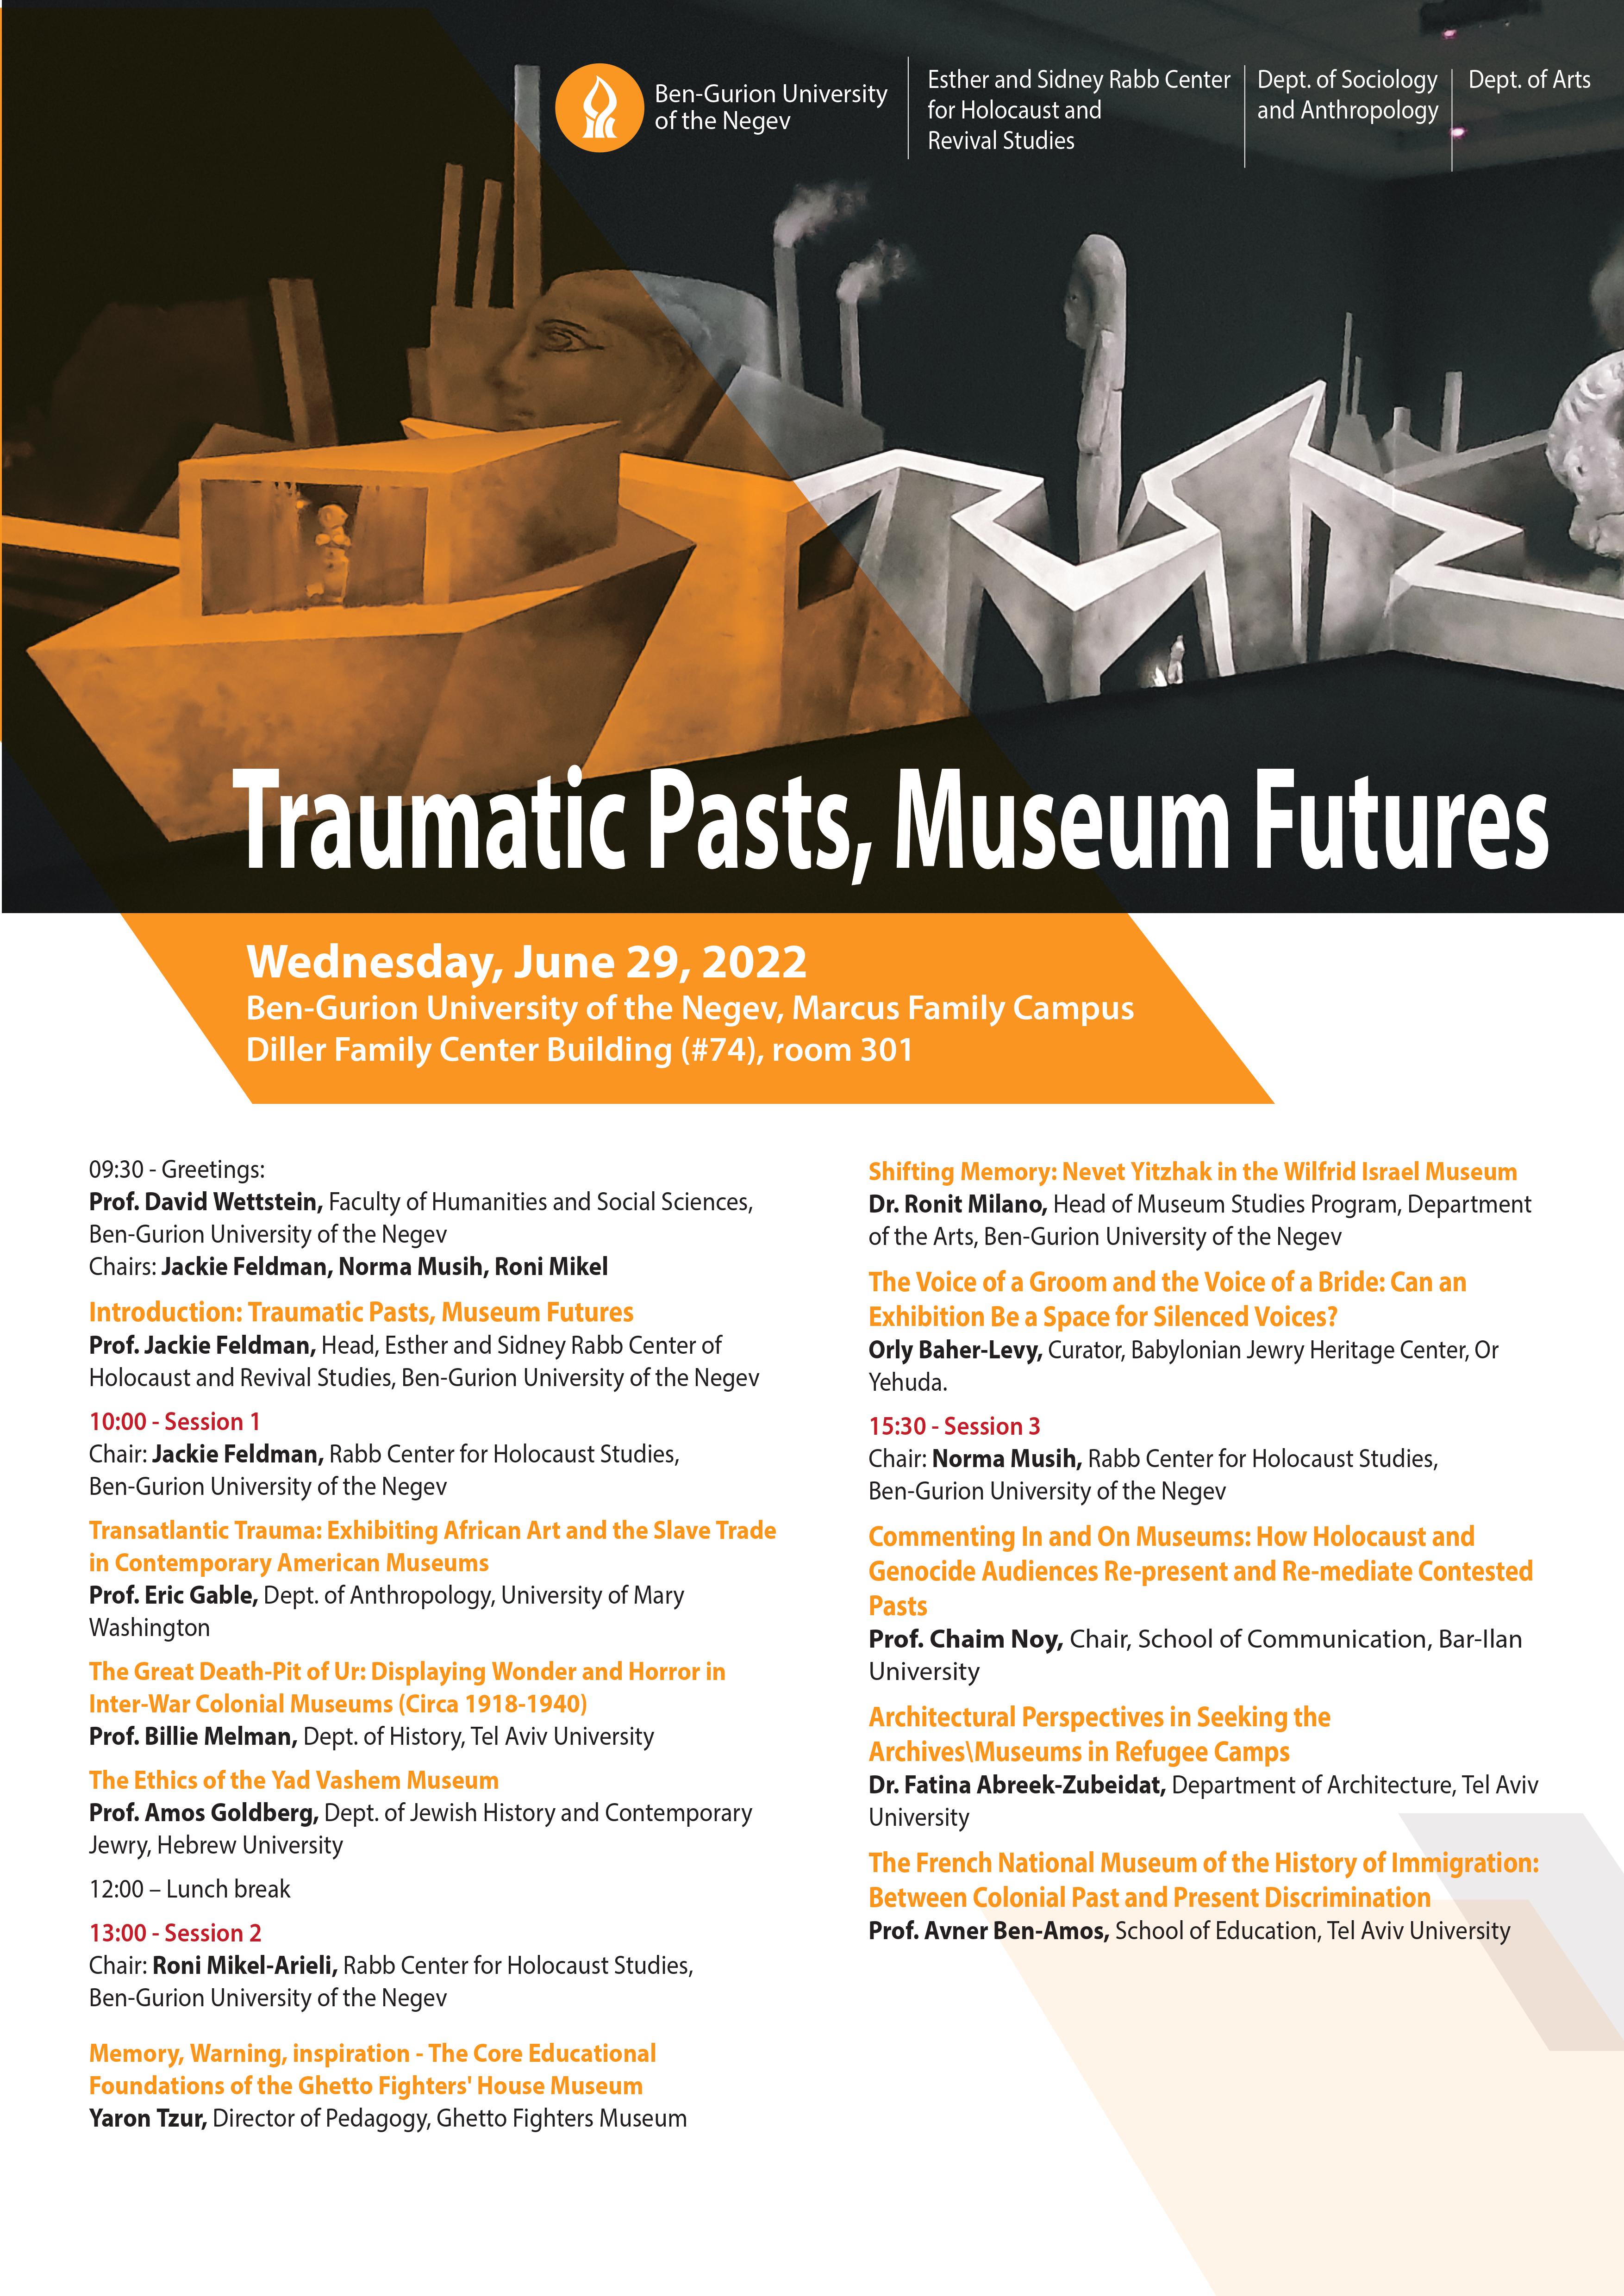 Traumatic Pasts Museum Futures - poster 060622.jpg